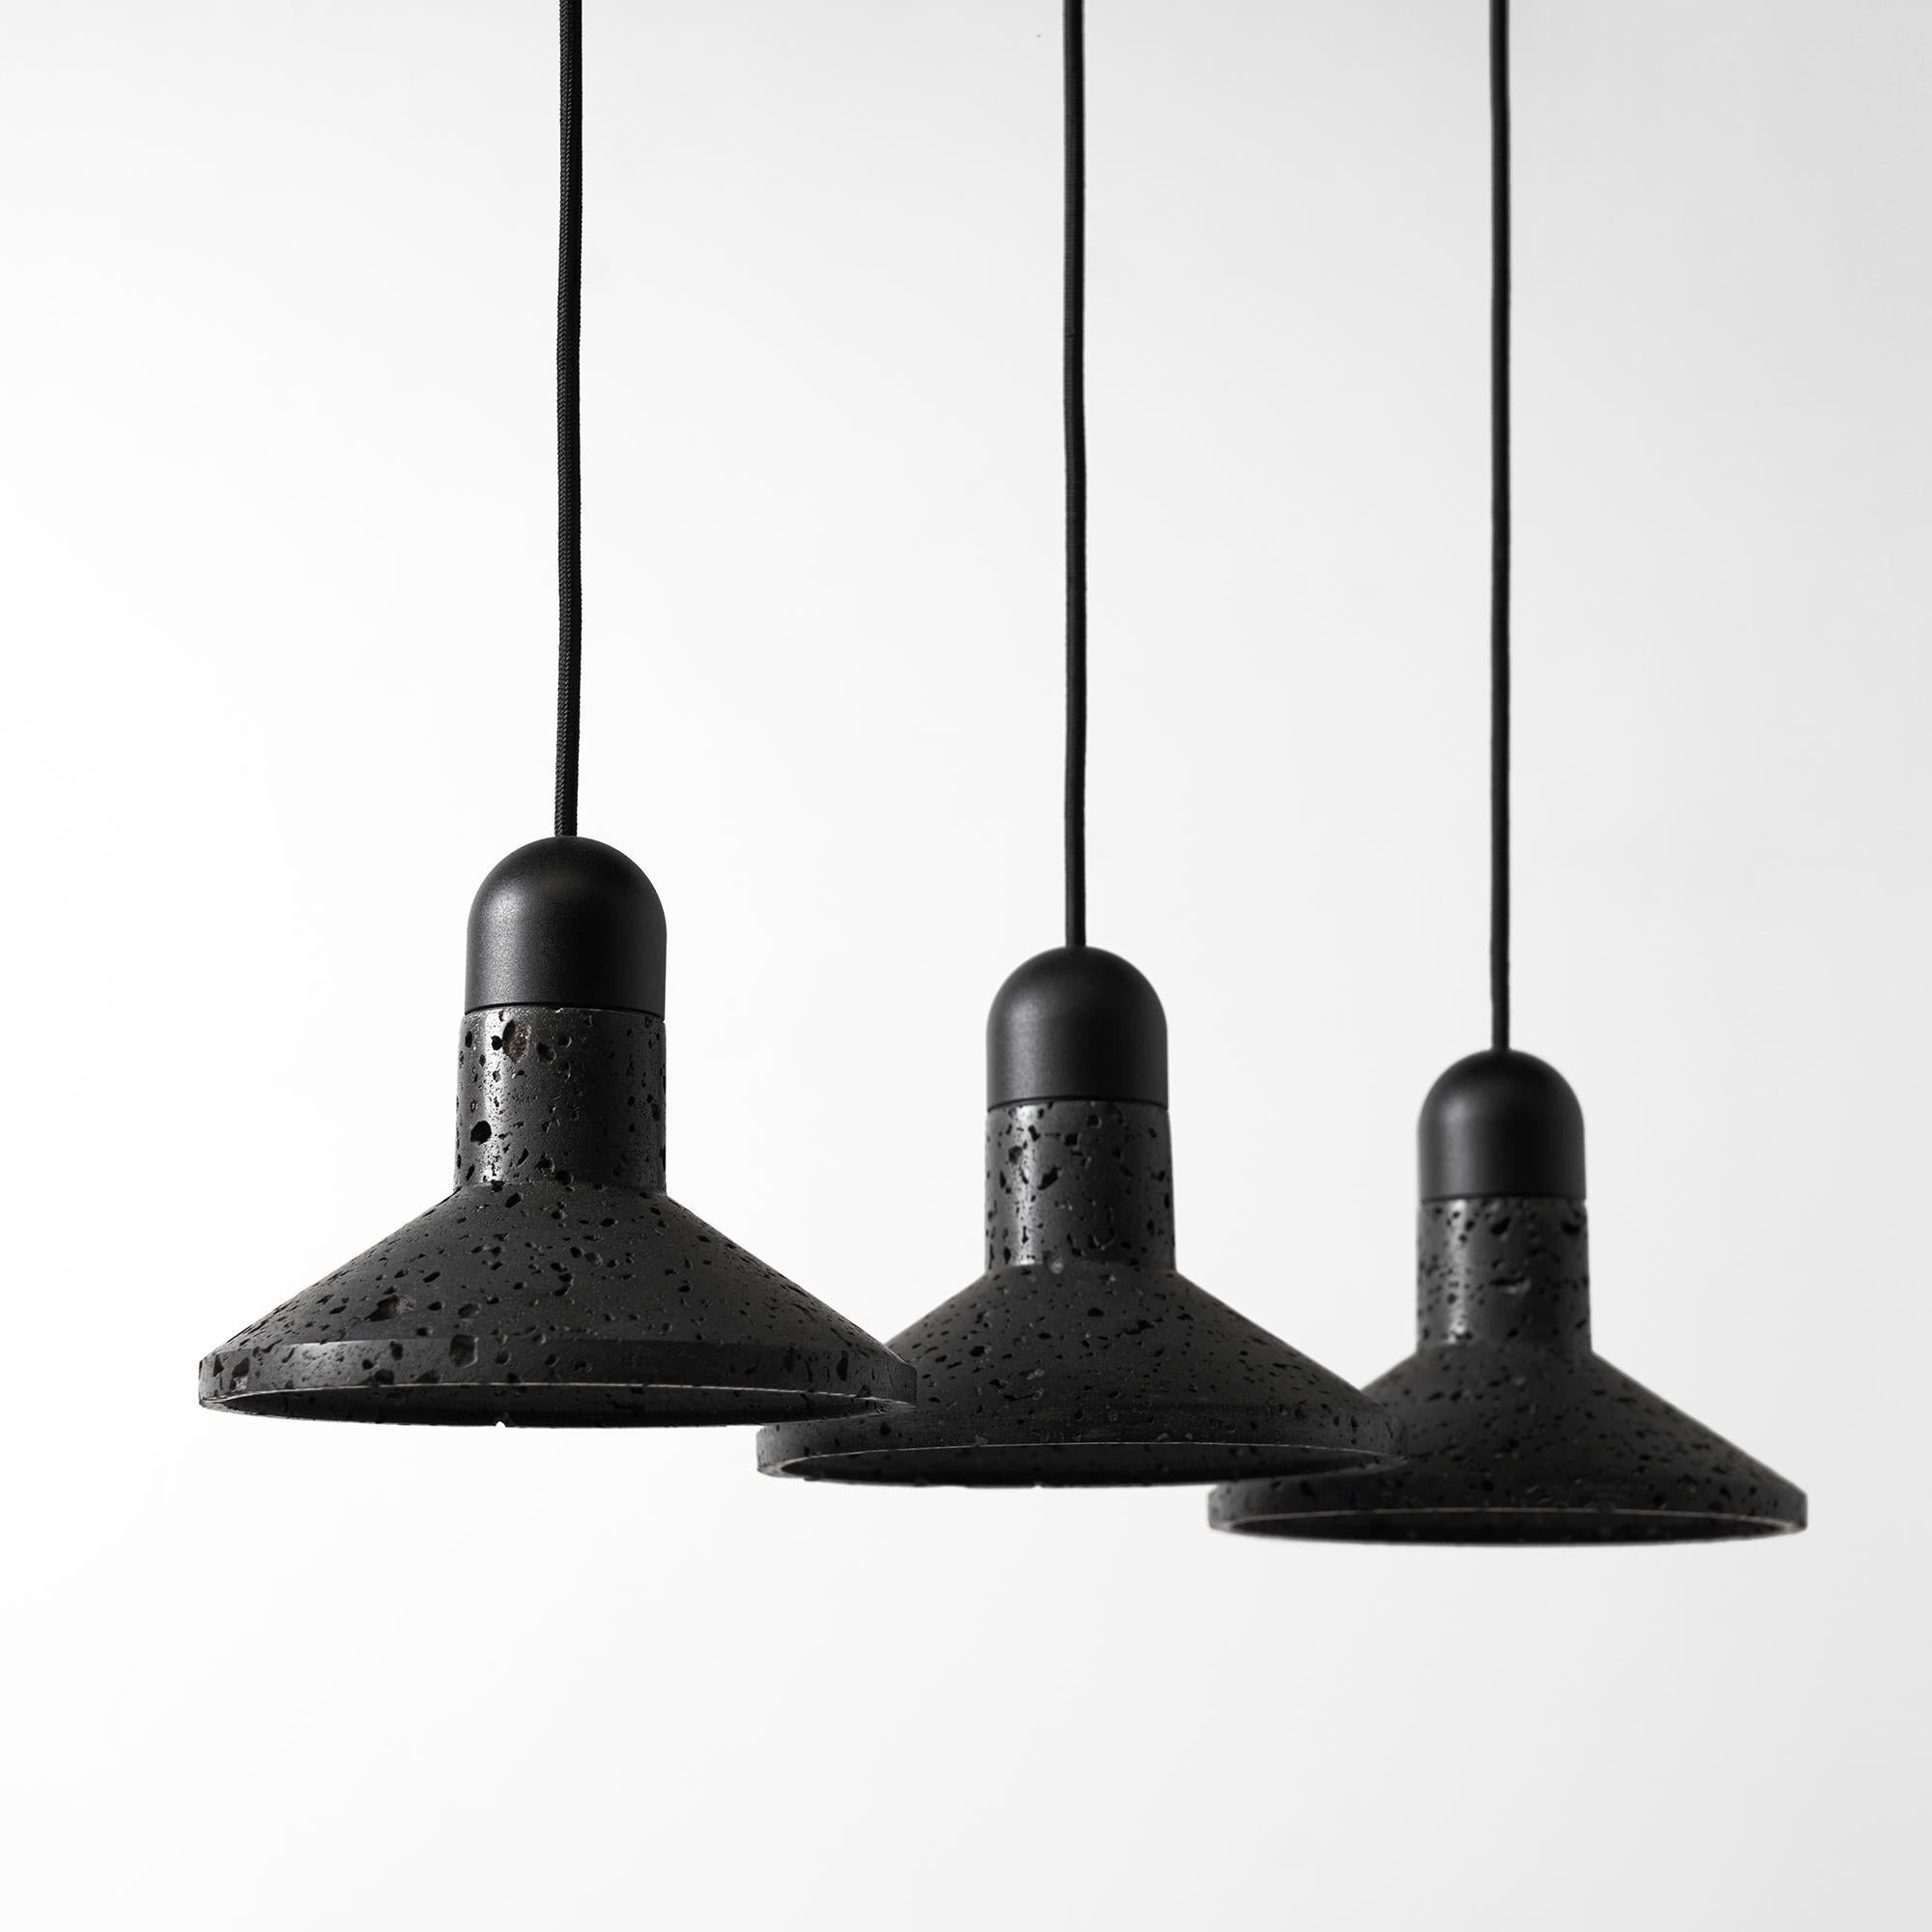 Contemporary Lava Stone and Aluminum Pendant Light, “Shang, ” by Buzao